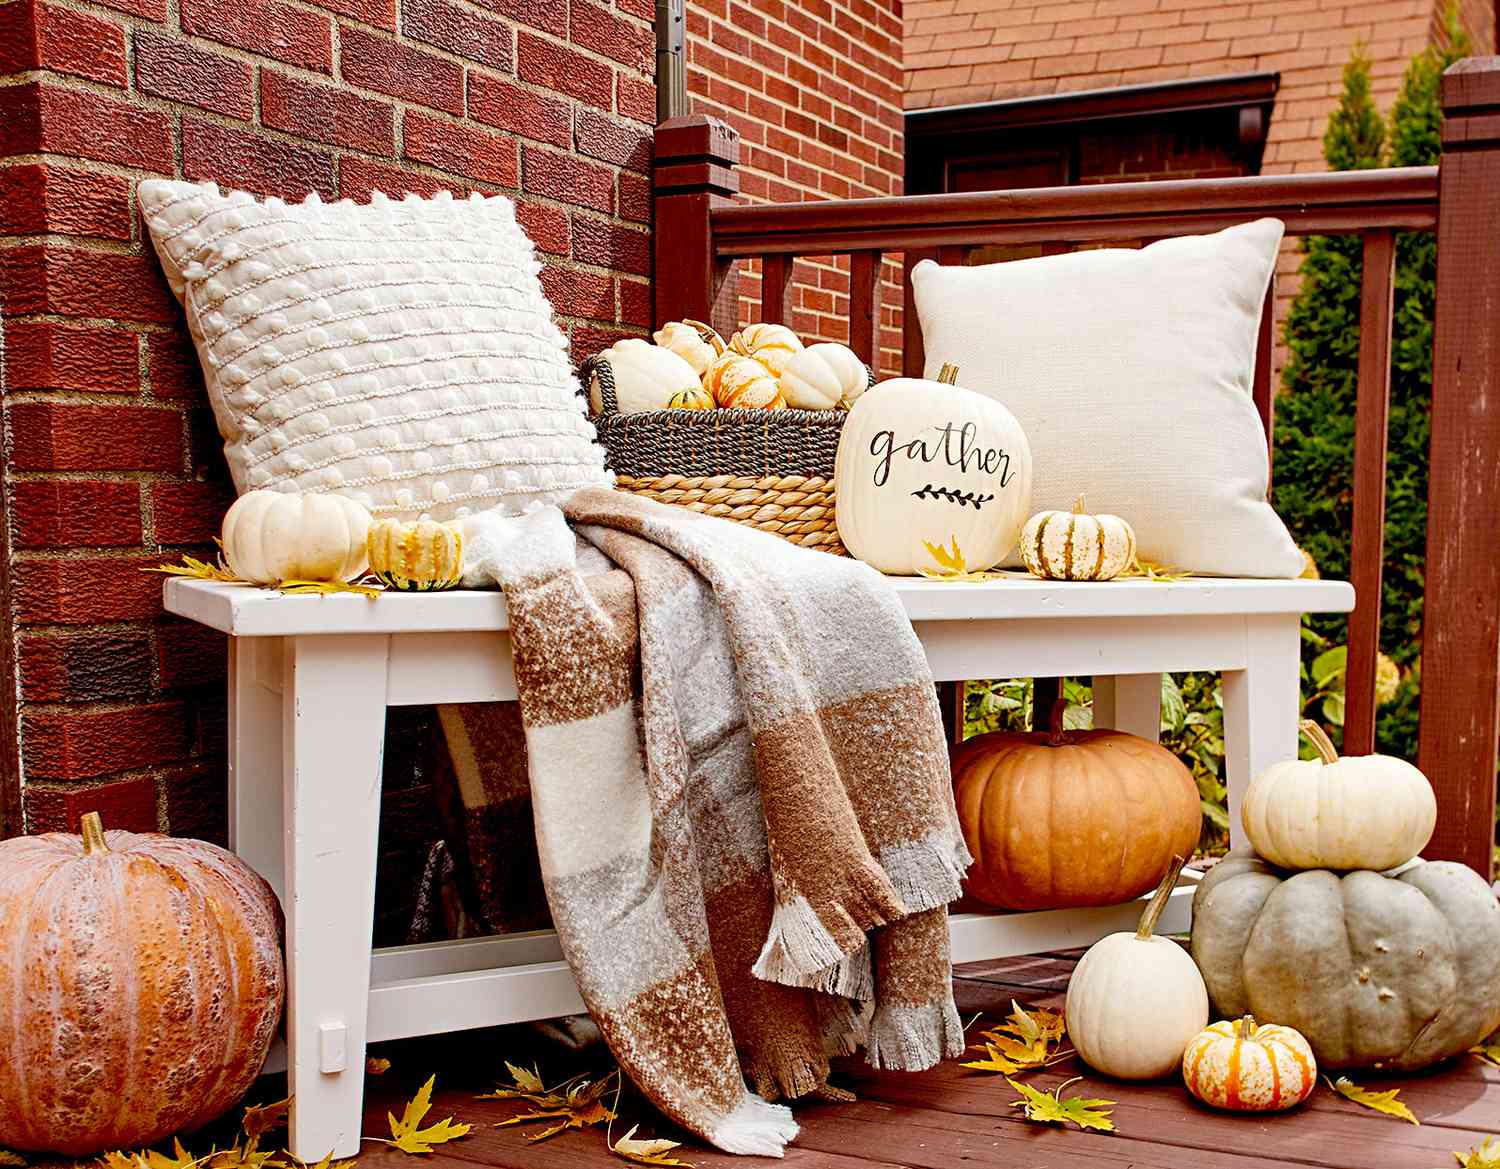 Bench with pumpkins, pillows, and blanket